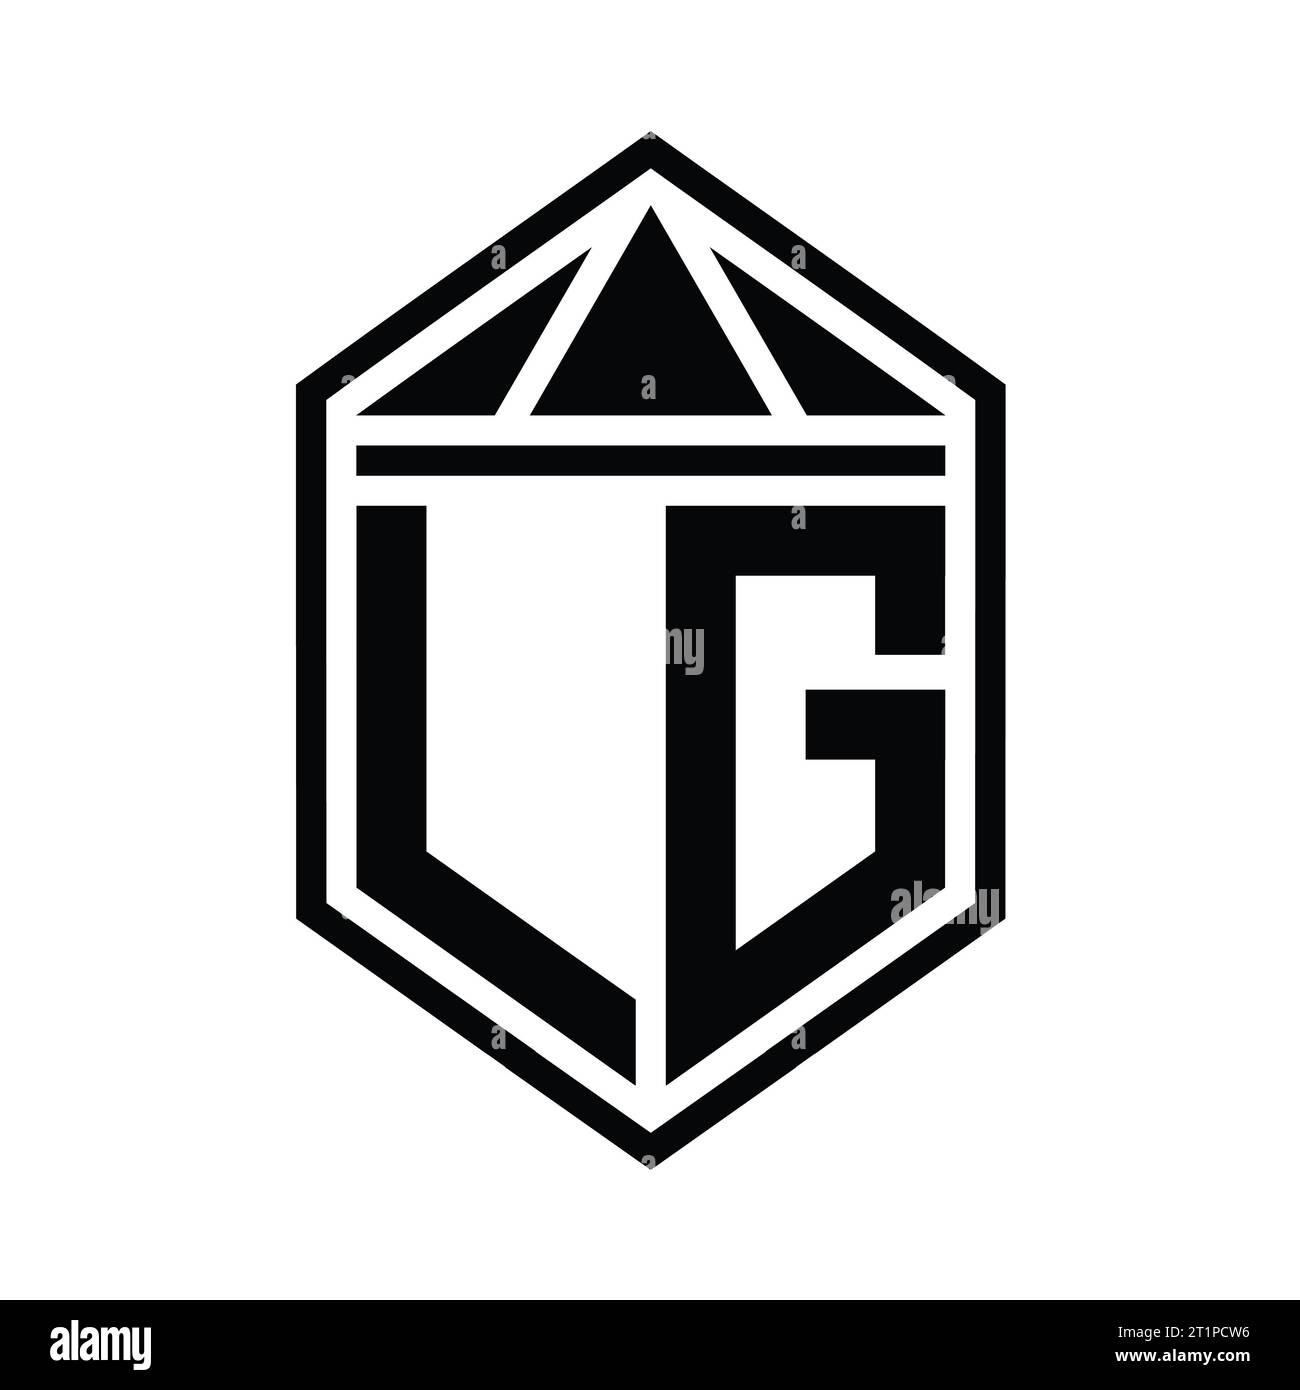 Lg Letter Monogram Lettermark Vector Icon Stock Illustration - Download  Image Now - Abstract, Business, Design - iStock